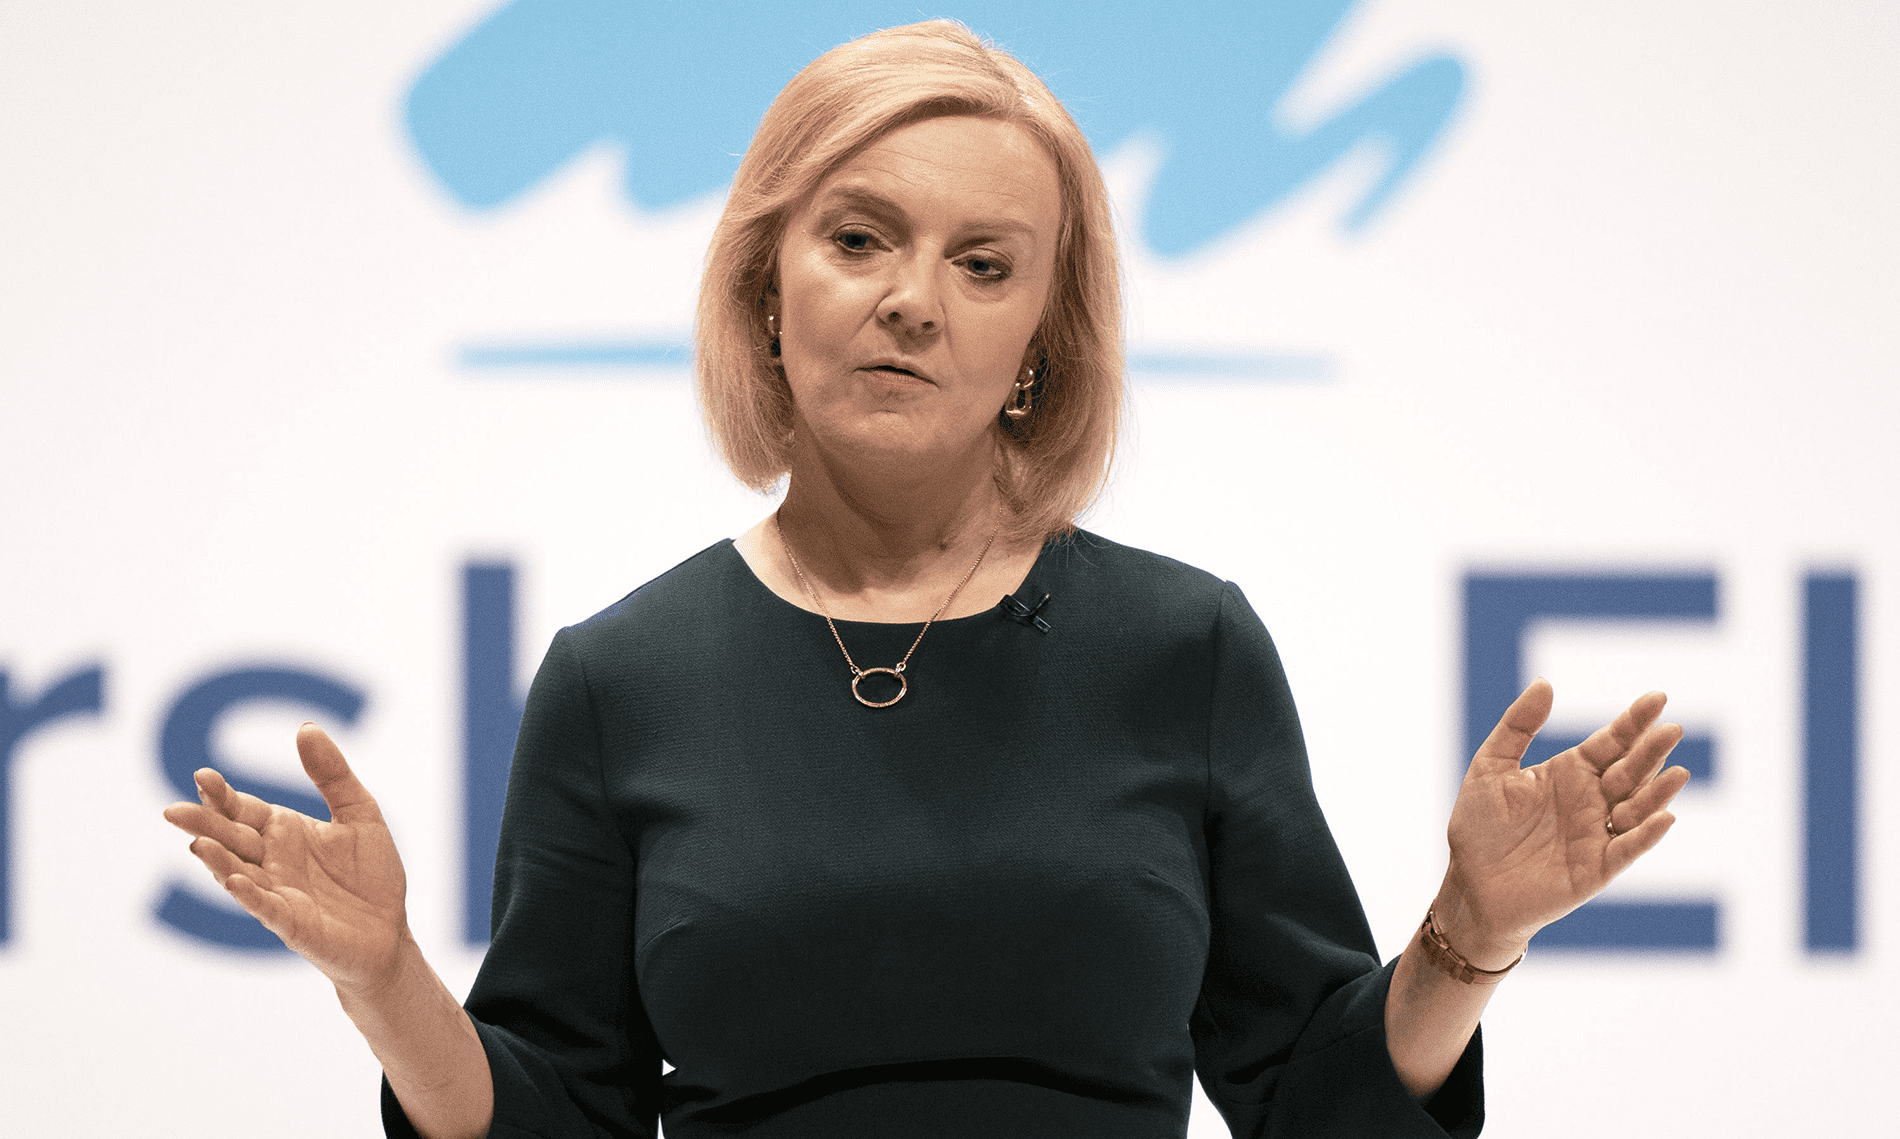 Liz Truss handed £19k severance payment for her 49 days as PM